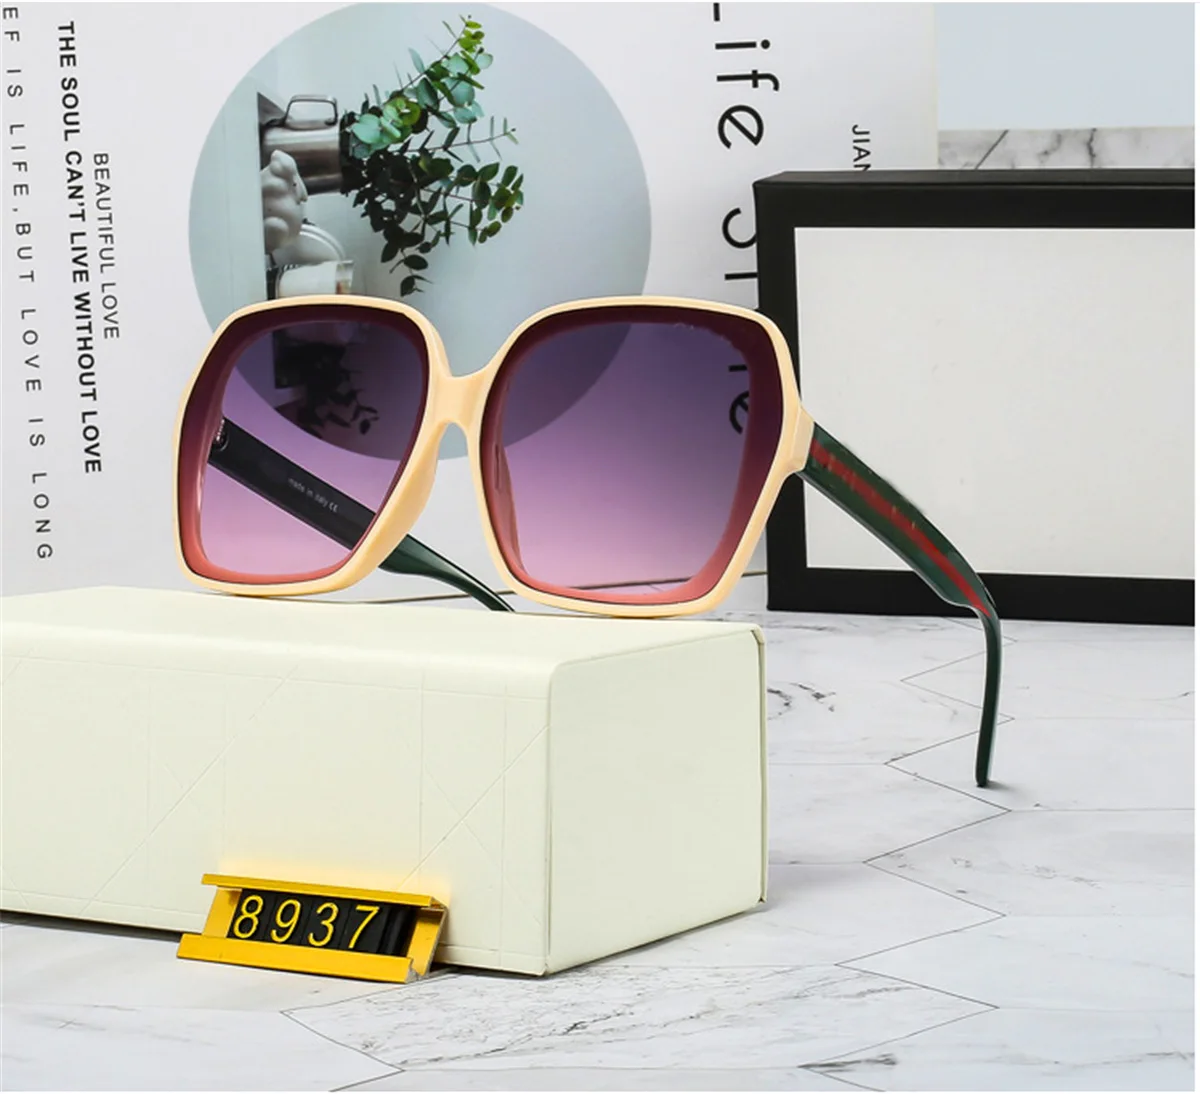 

2021 New Arrivals Luxury Fashion Designer Famous Brands Shades Square Women Sunglasses, As picture